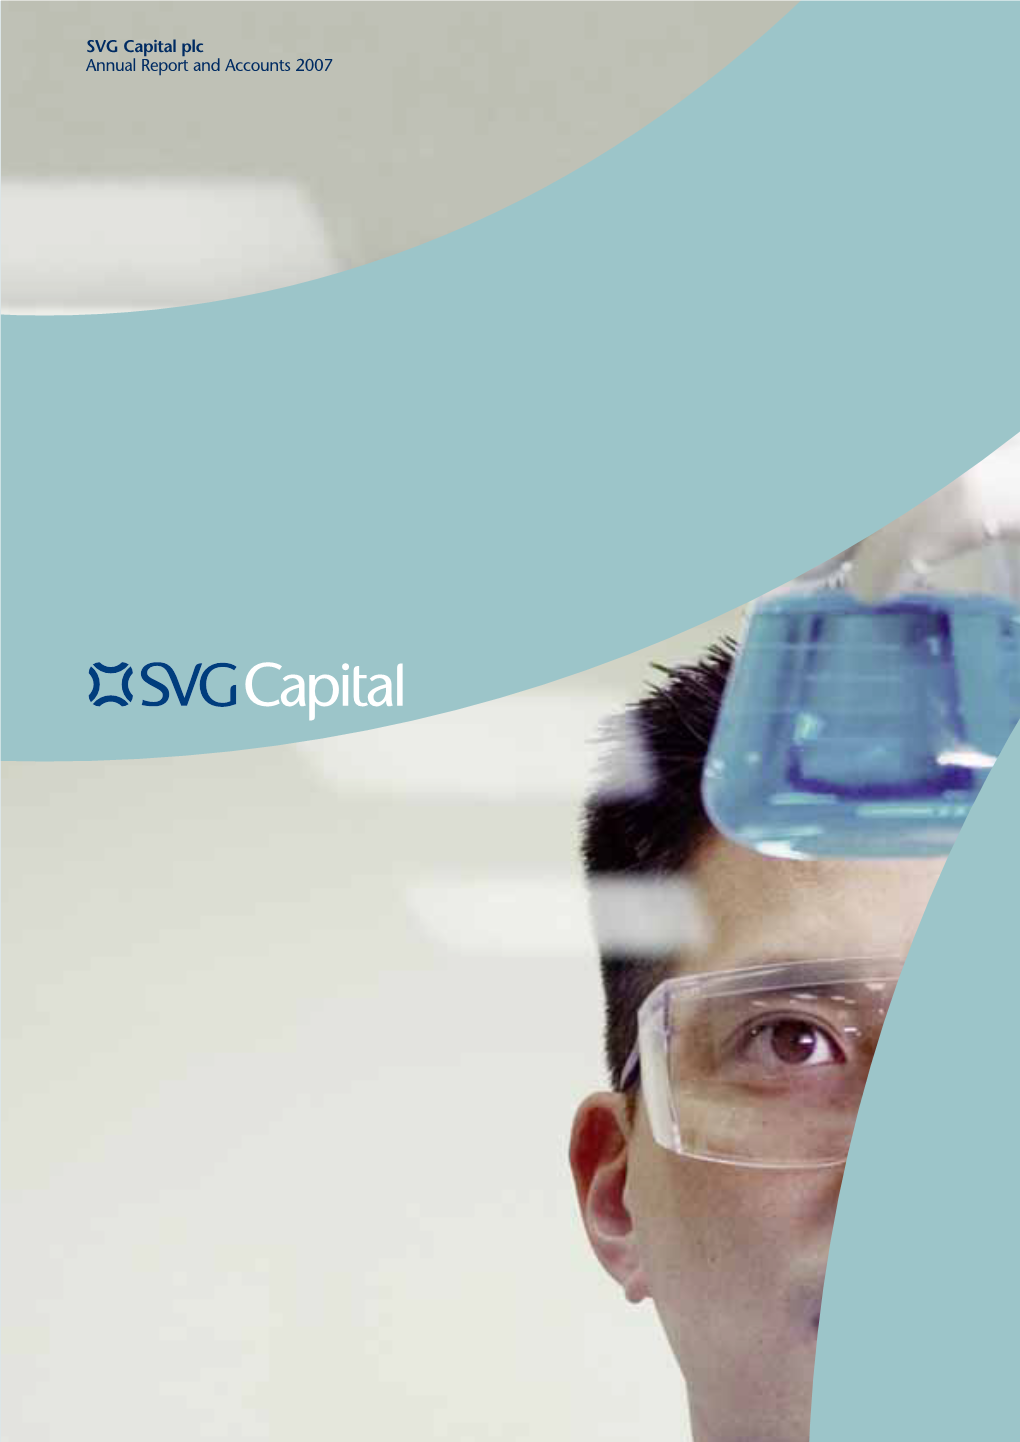 SVG Capital Plc Annual Report and Accounts 2007